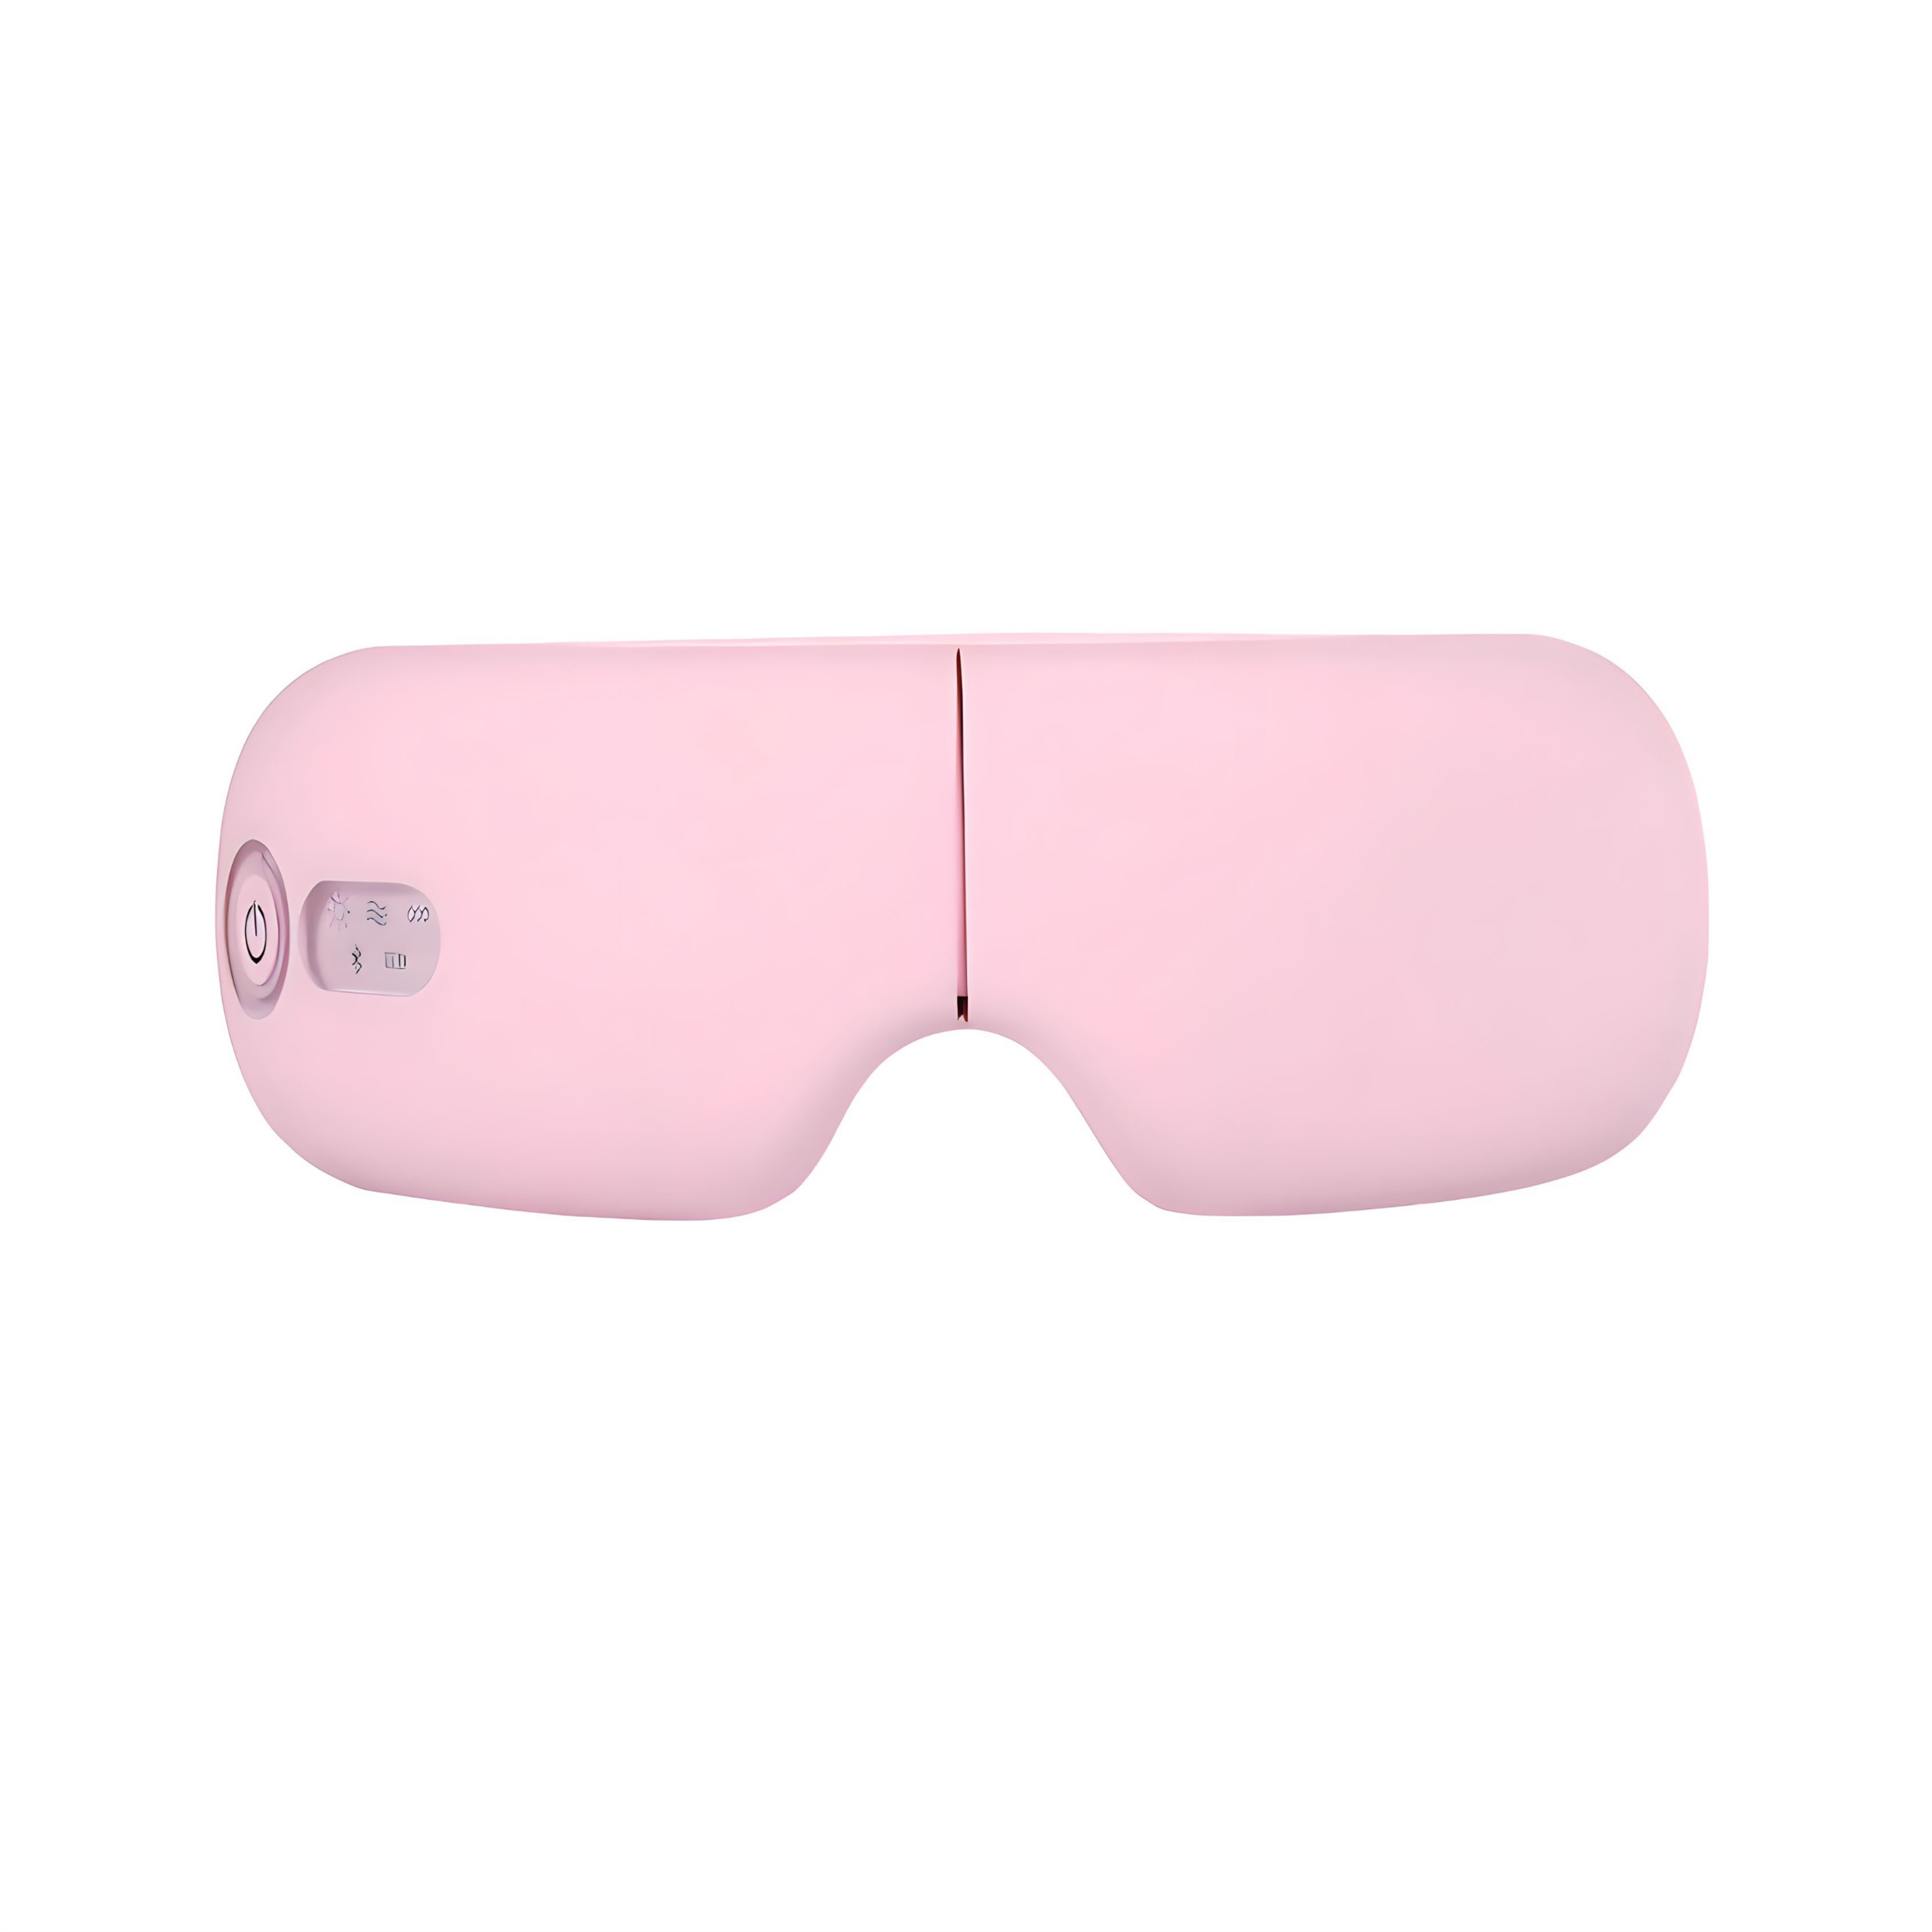 The Eyla eye massager, a handheld device with an oval-shaped surface for a relaxing eye massage.